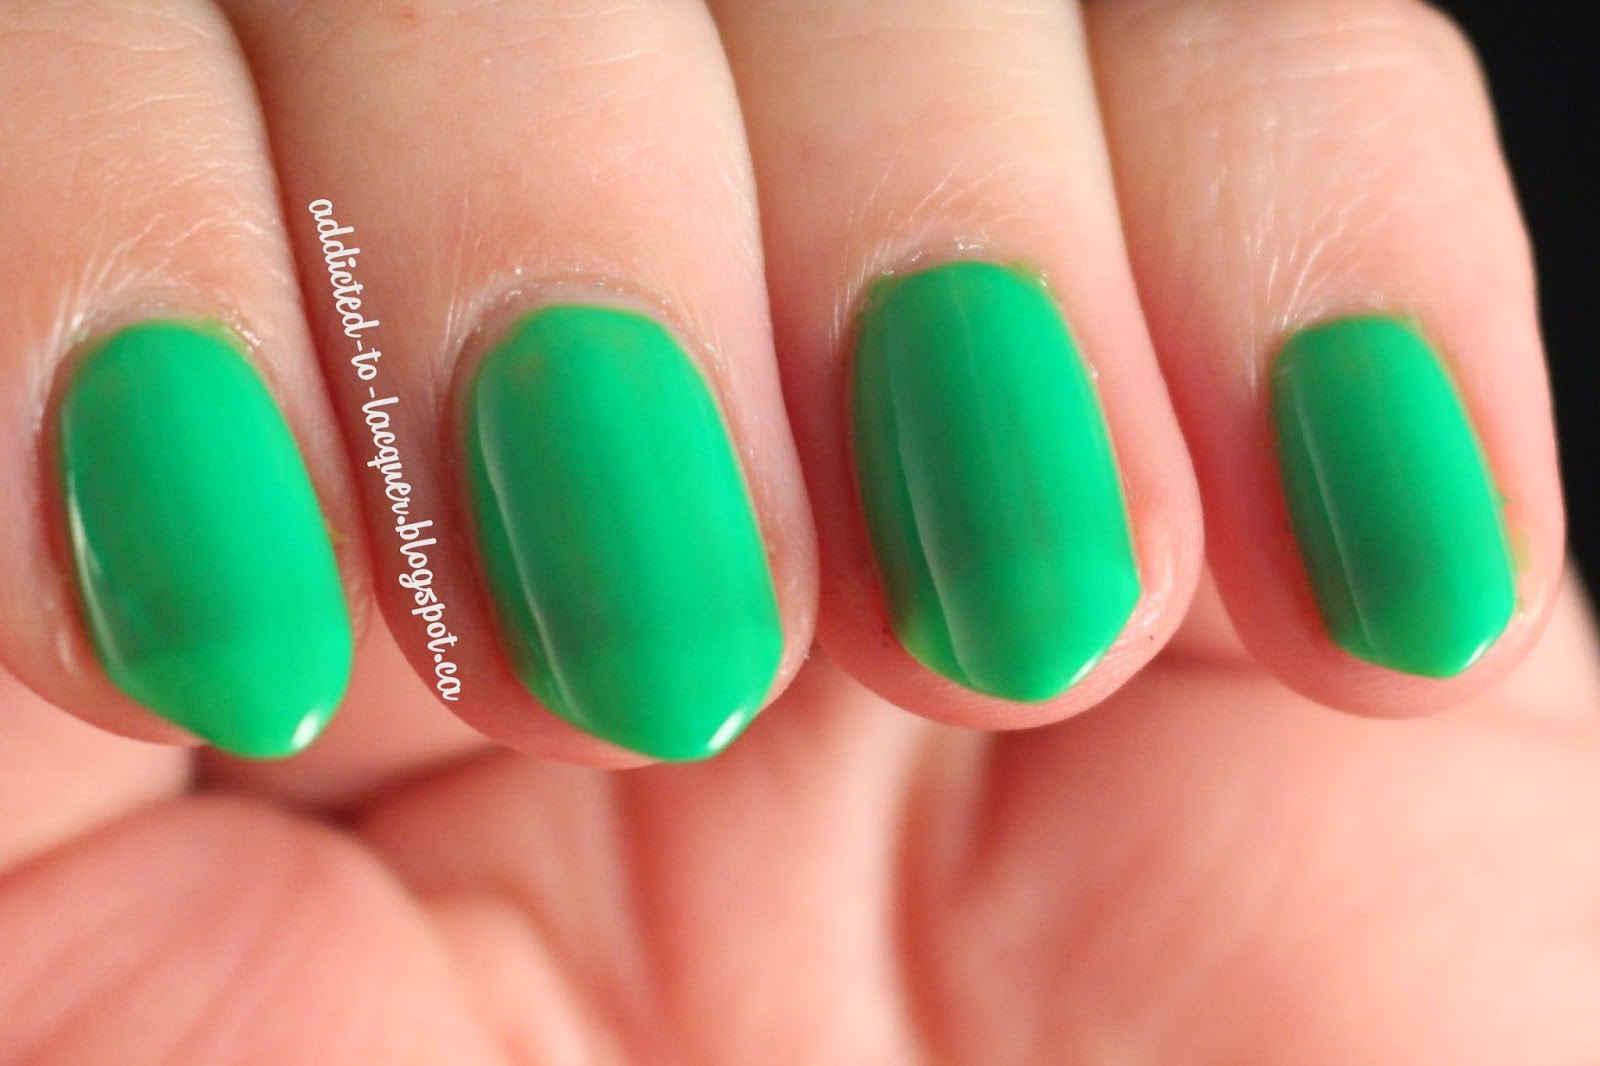 3. China Glaze Nail Lacquer in "Kiwi Cool-Ada" - wide 10